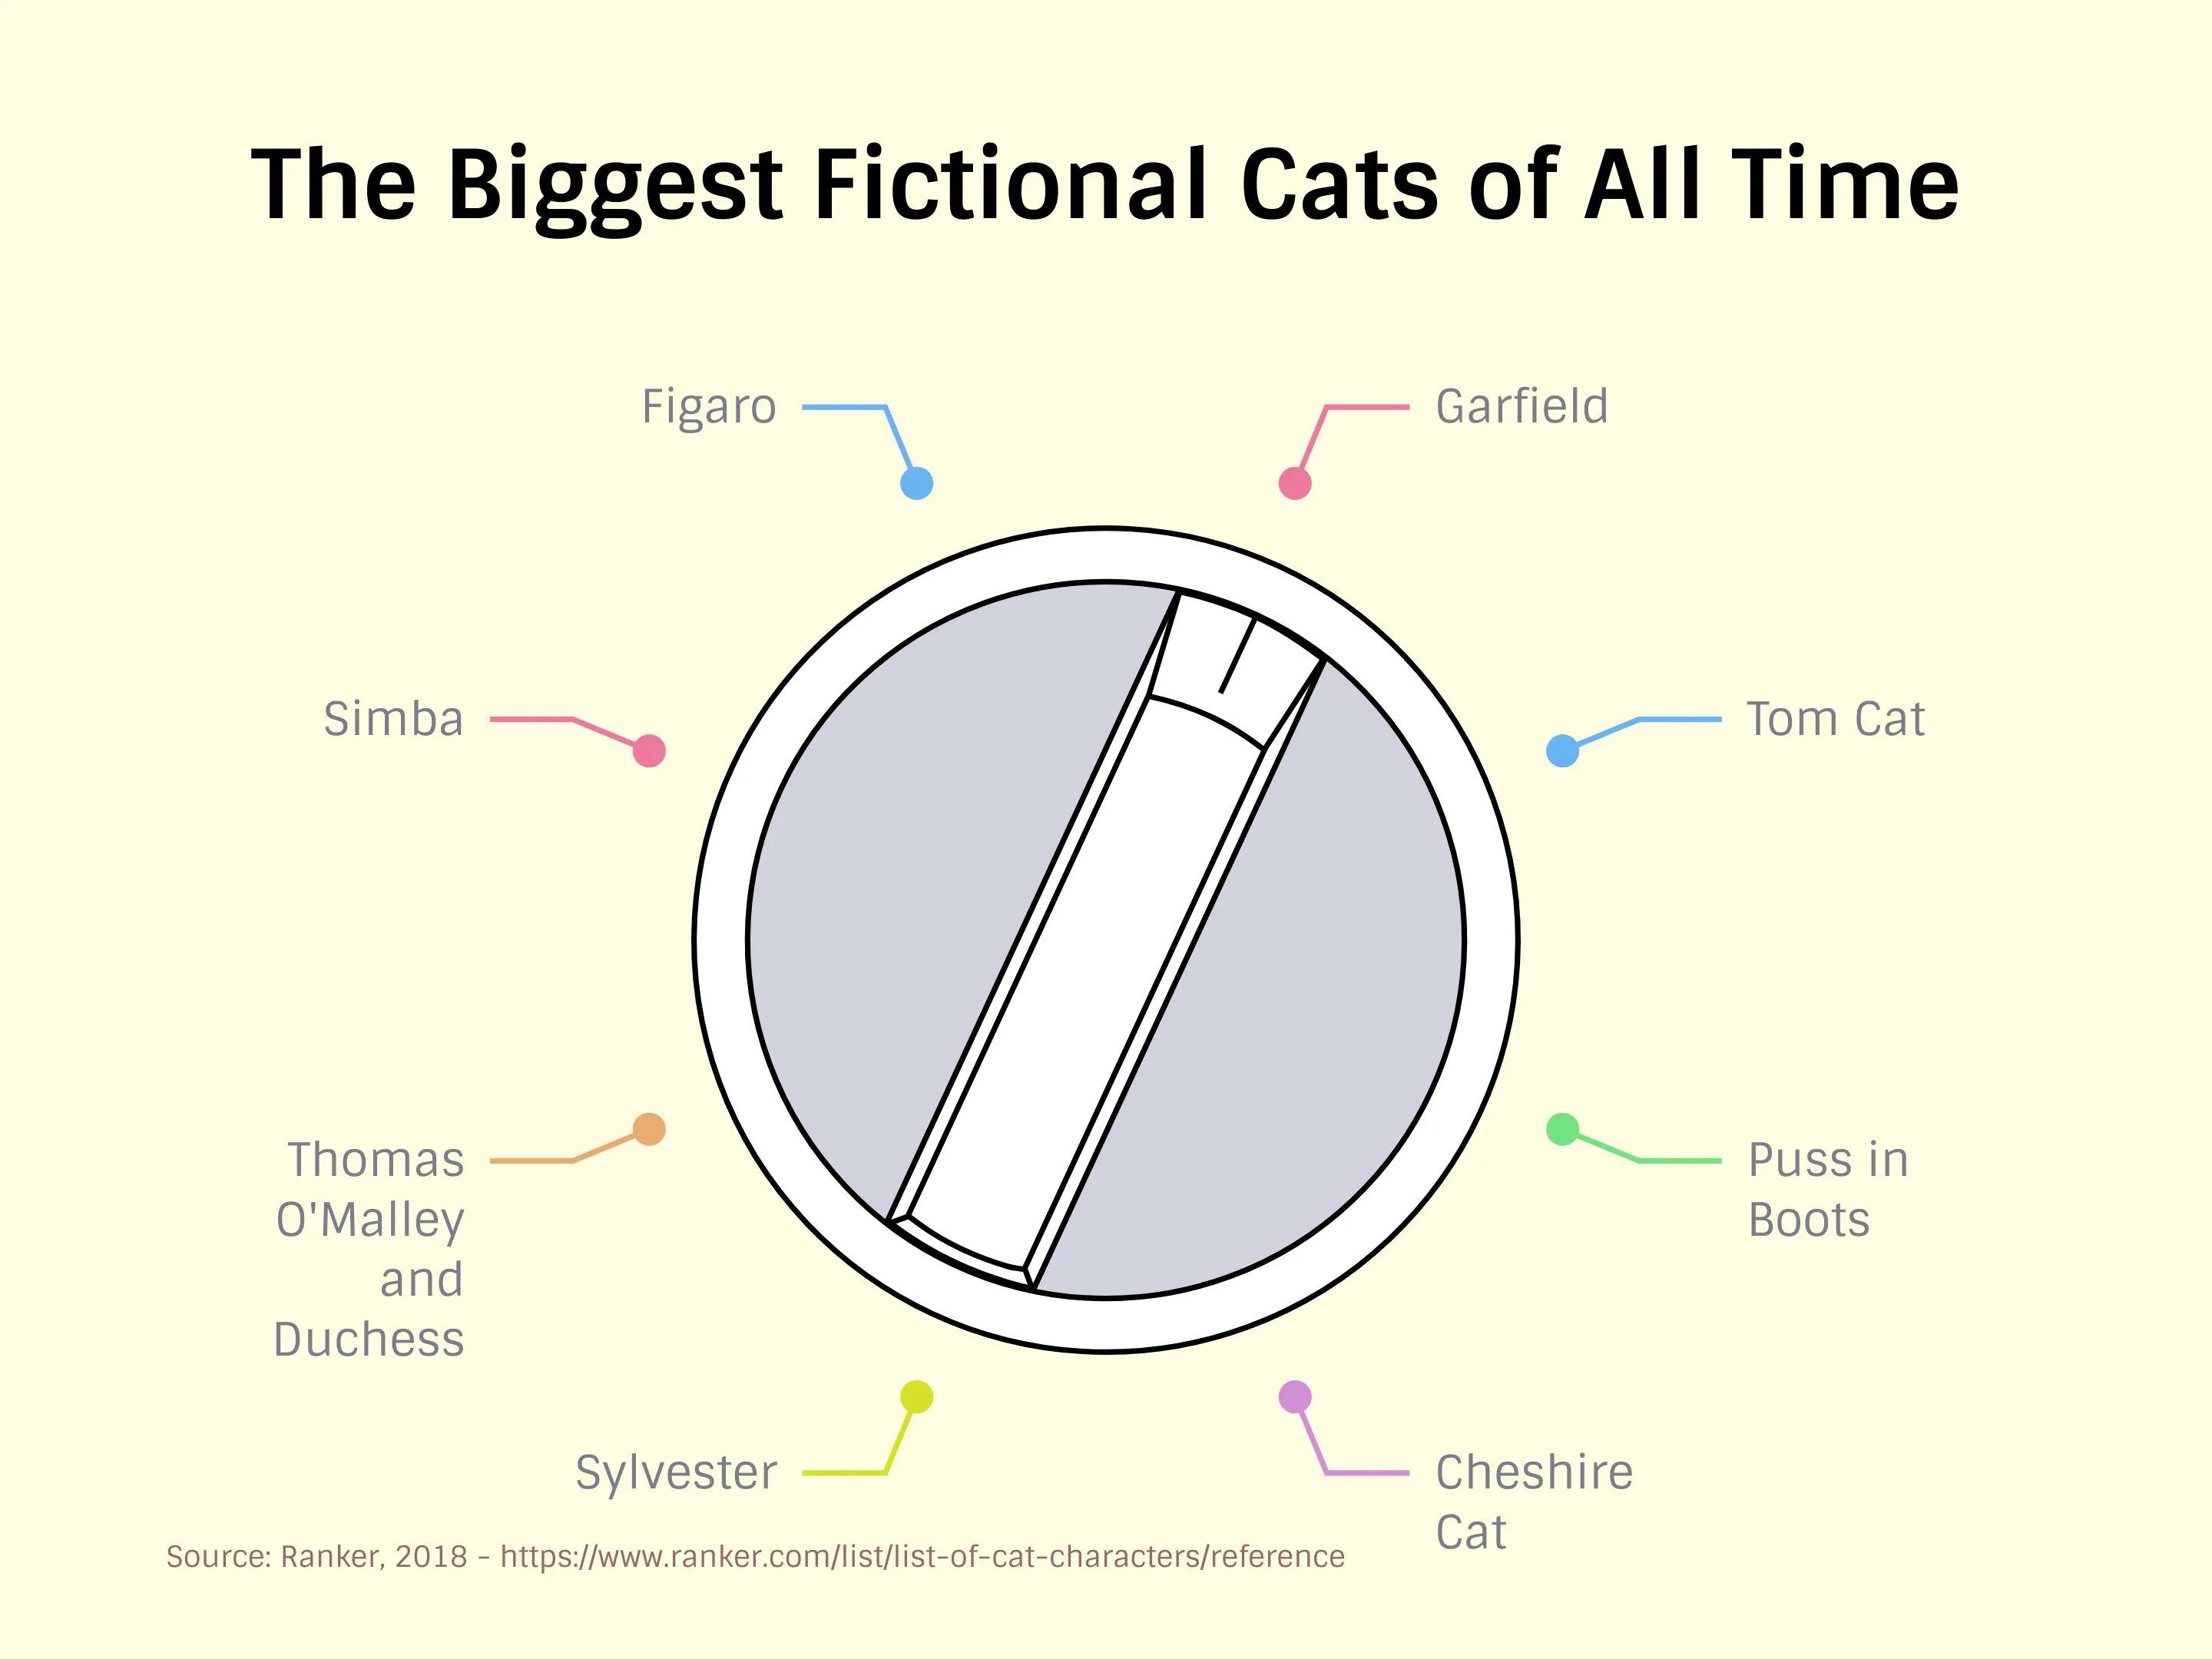 The Biggest Fictional Cats of All Time